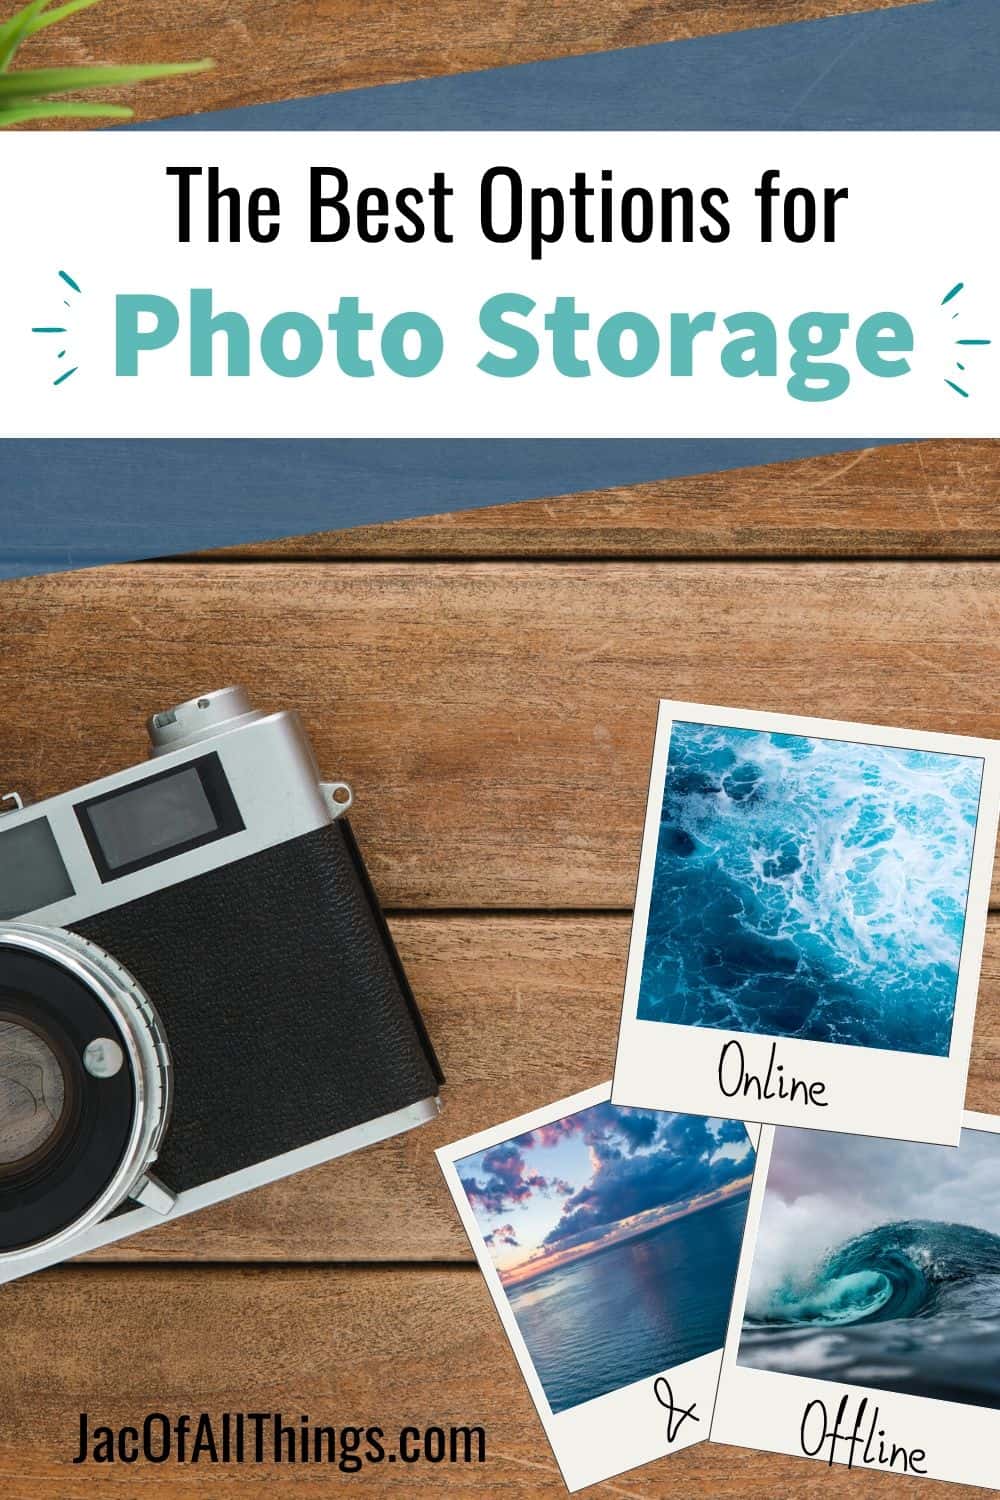 Keep your photos safe with these photo storage options. Learn all about the best places to save your photos online and offline so you can forever hold onto those precious memories.